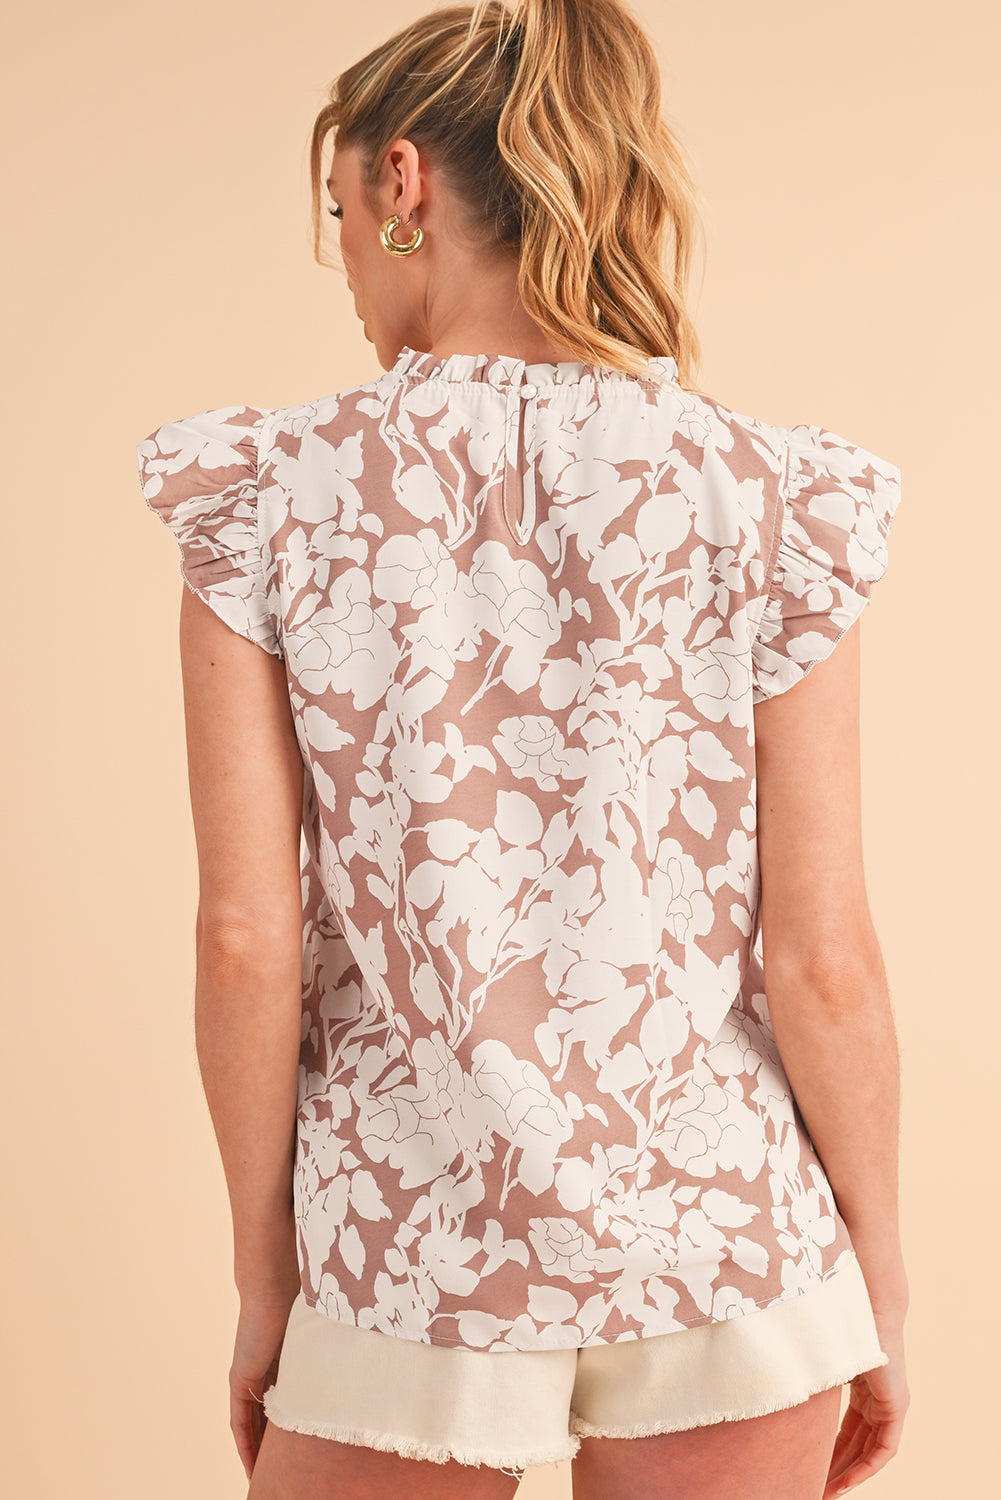 Women's Khaki Floral Blouse with Ruffled Short Sleeves